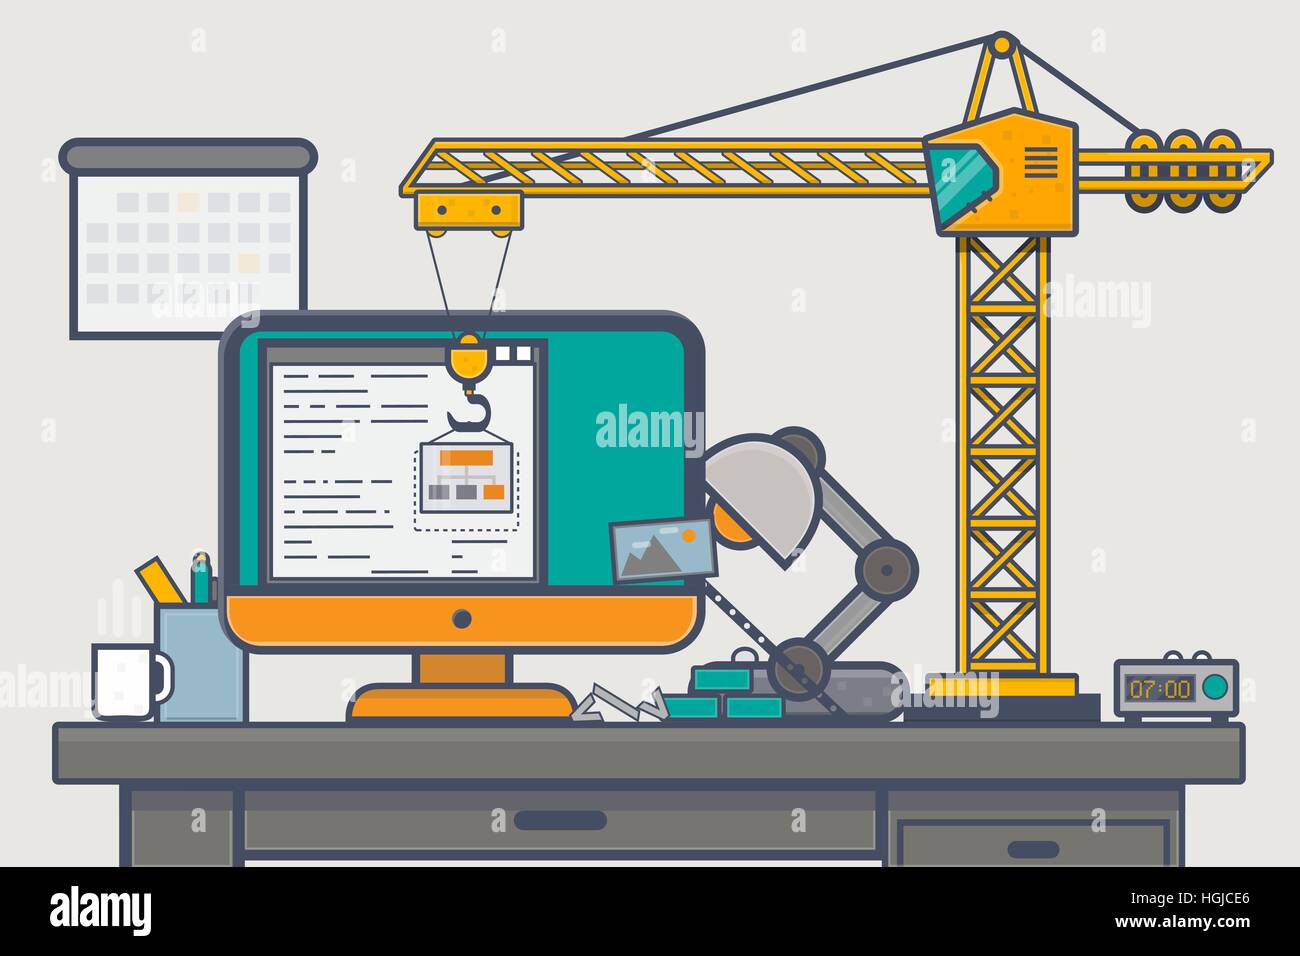 Line style abstract concept. Website building with construction crane on desk full of design items. Stock Vector